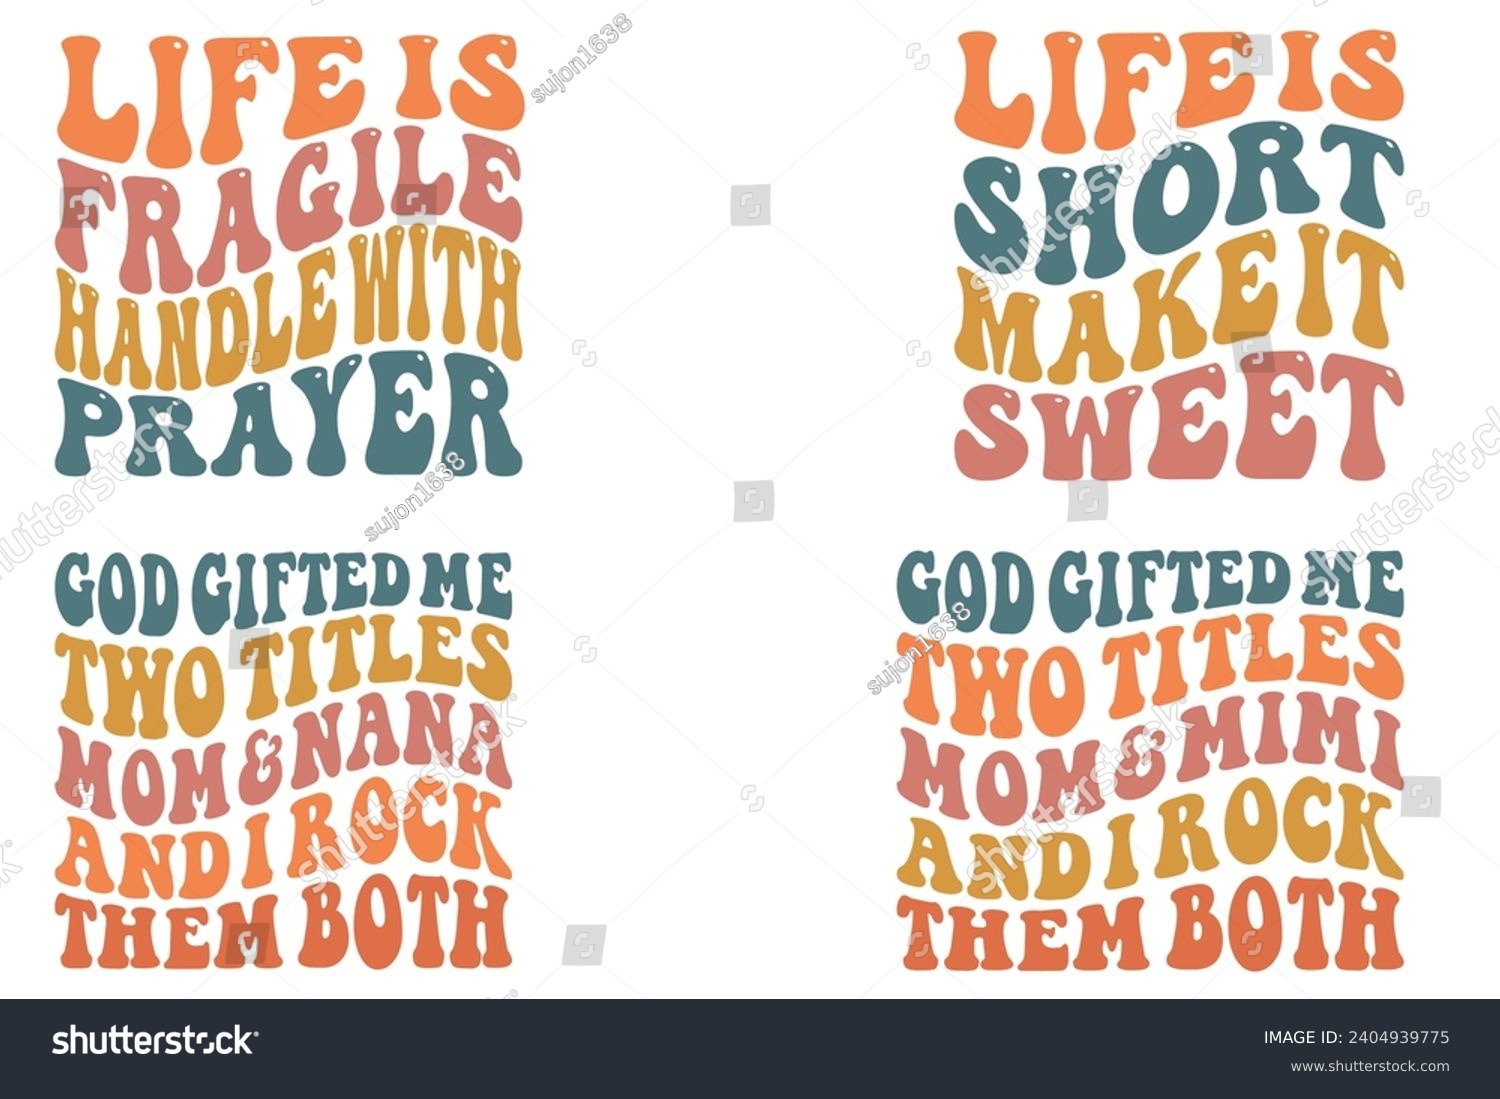 SVG of  Life Is Fragile Handle With Prayer, Life is Short Make It Sweet, God Gifted Me Two Titles Mom And Nana and I rock them both, God Gifted Me Two Titles Mom And Gigi and I rock them both retro T-shirt svg